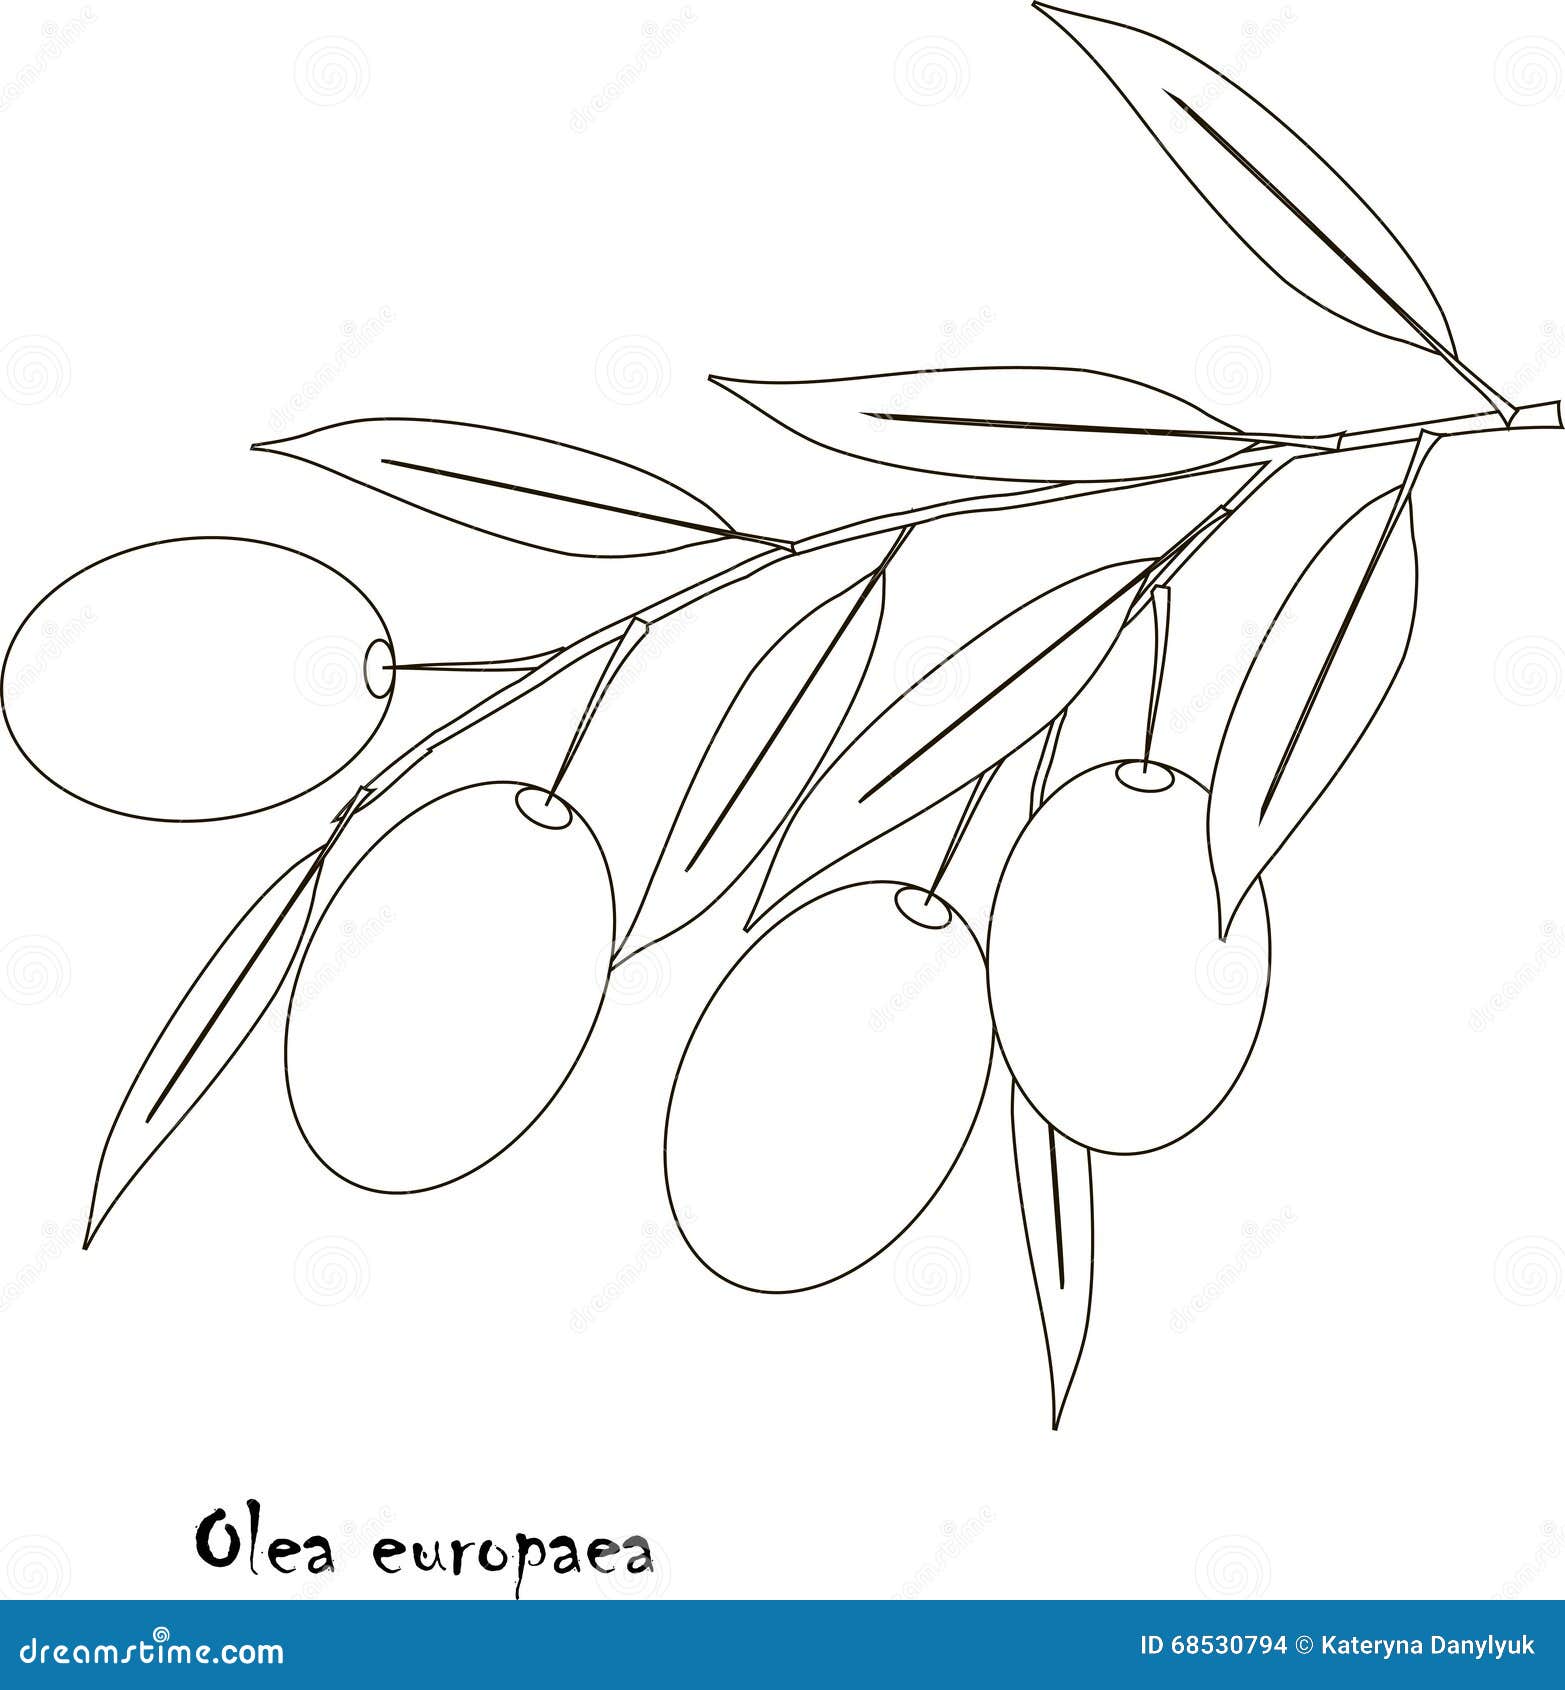 black and white sketch branch of olea europea, fruit and leaves